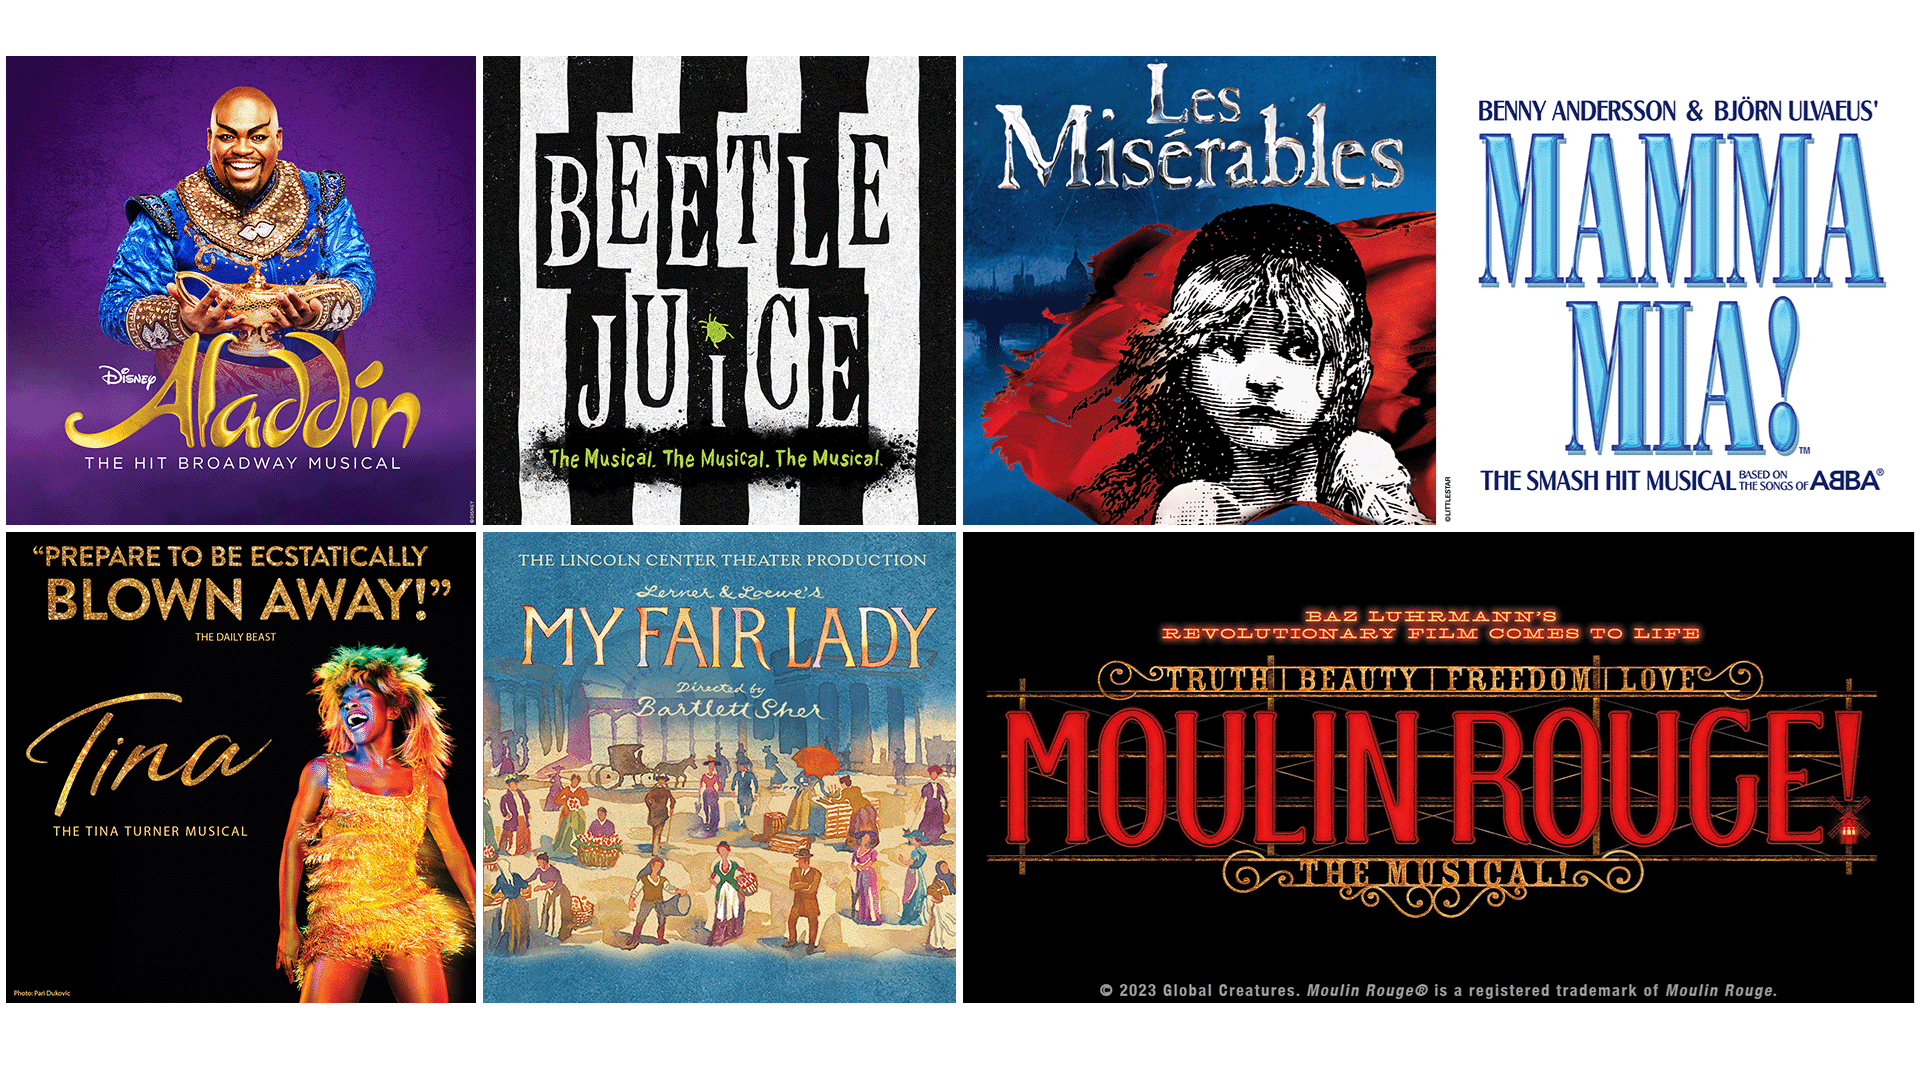 A collage of key art for Broadway shows. Shows include Aladdin, Beetle Juice, Mamma Mia!, Moulin Rouge!, Tina: The Tina Turner Musical, My Fair Lady, and Les Miserables.